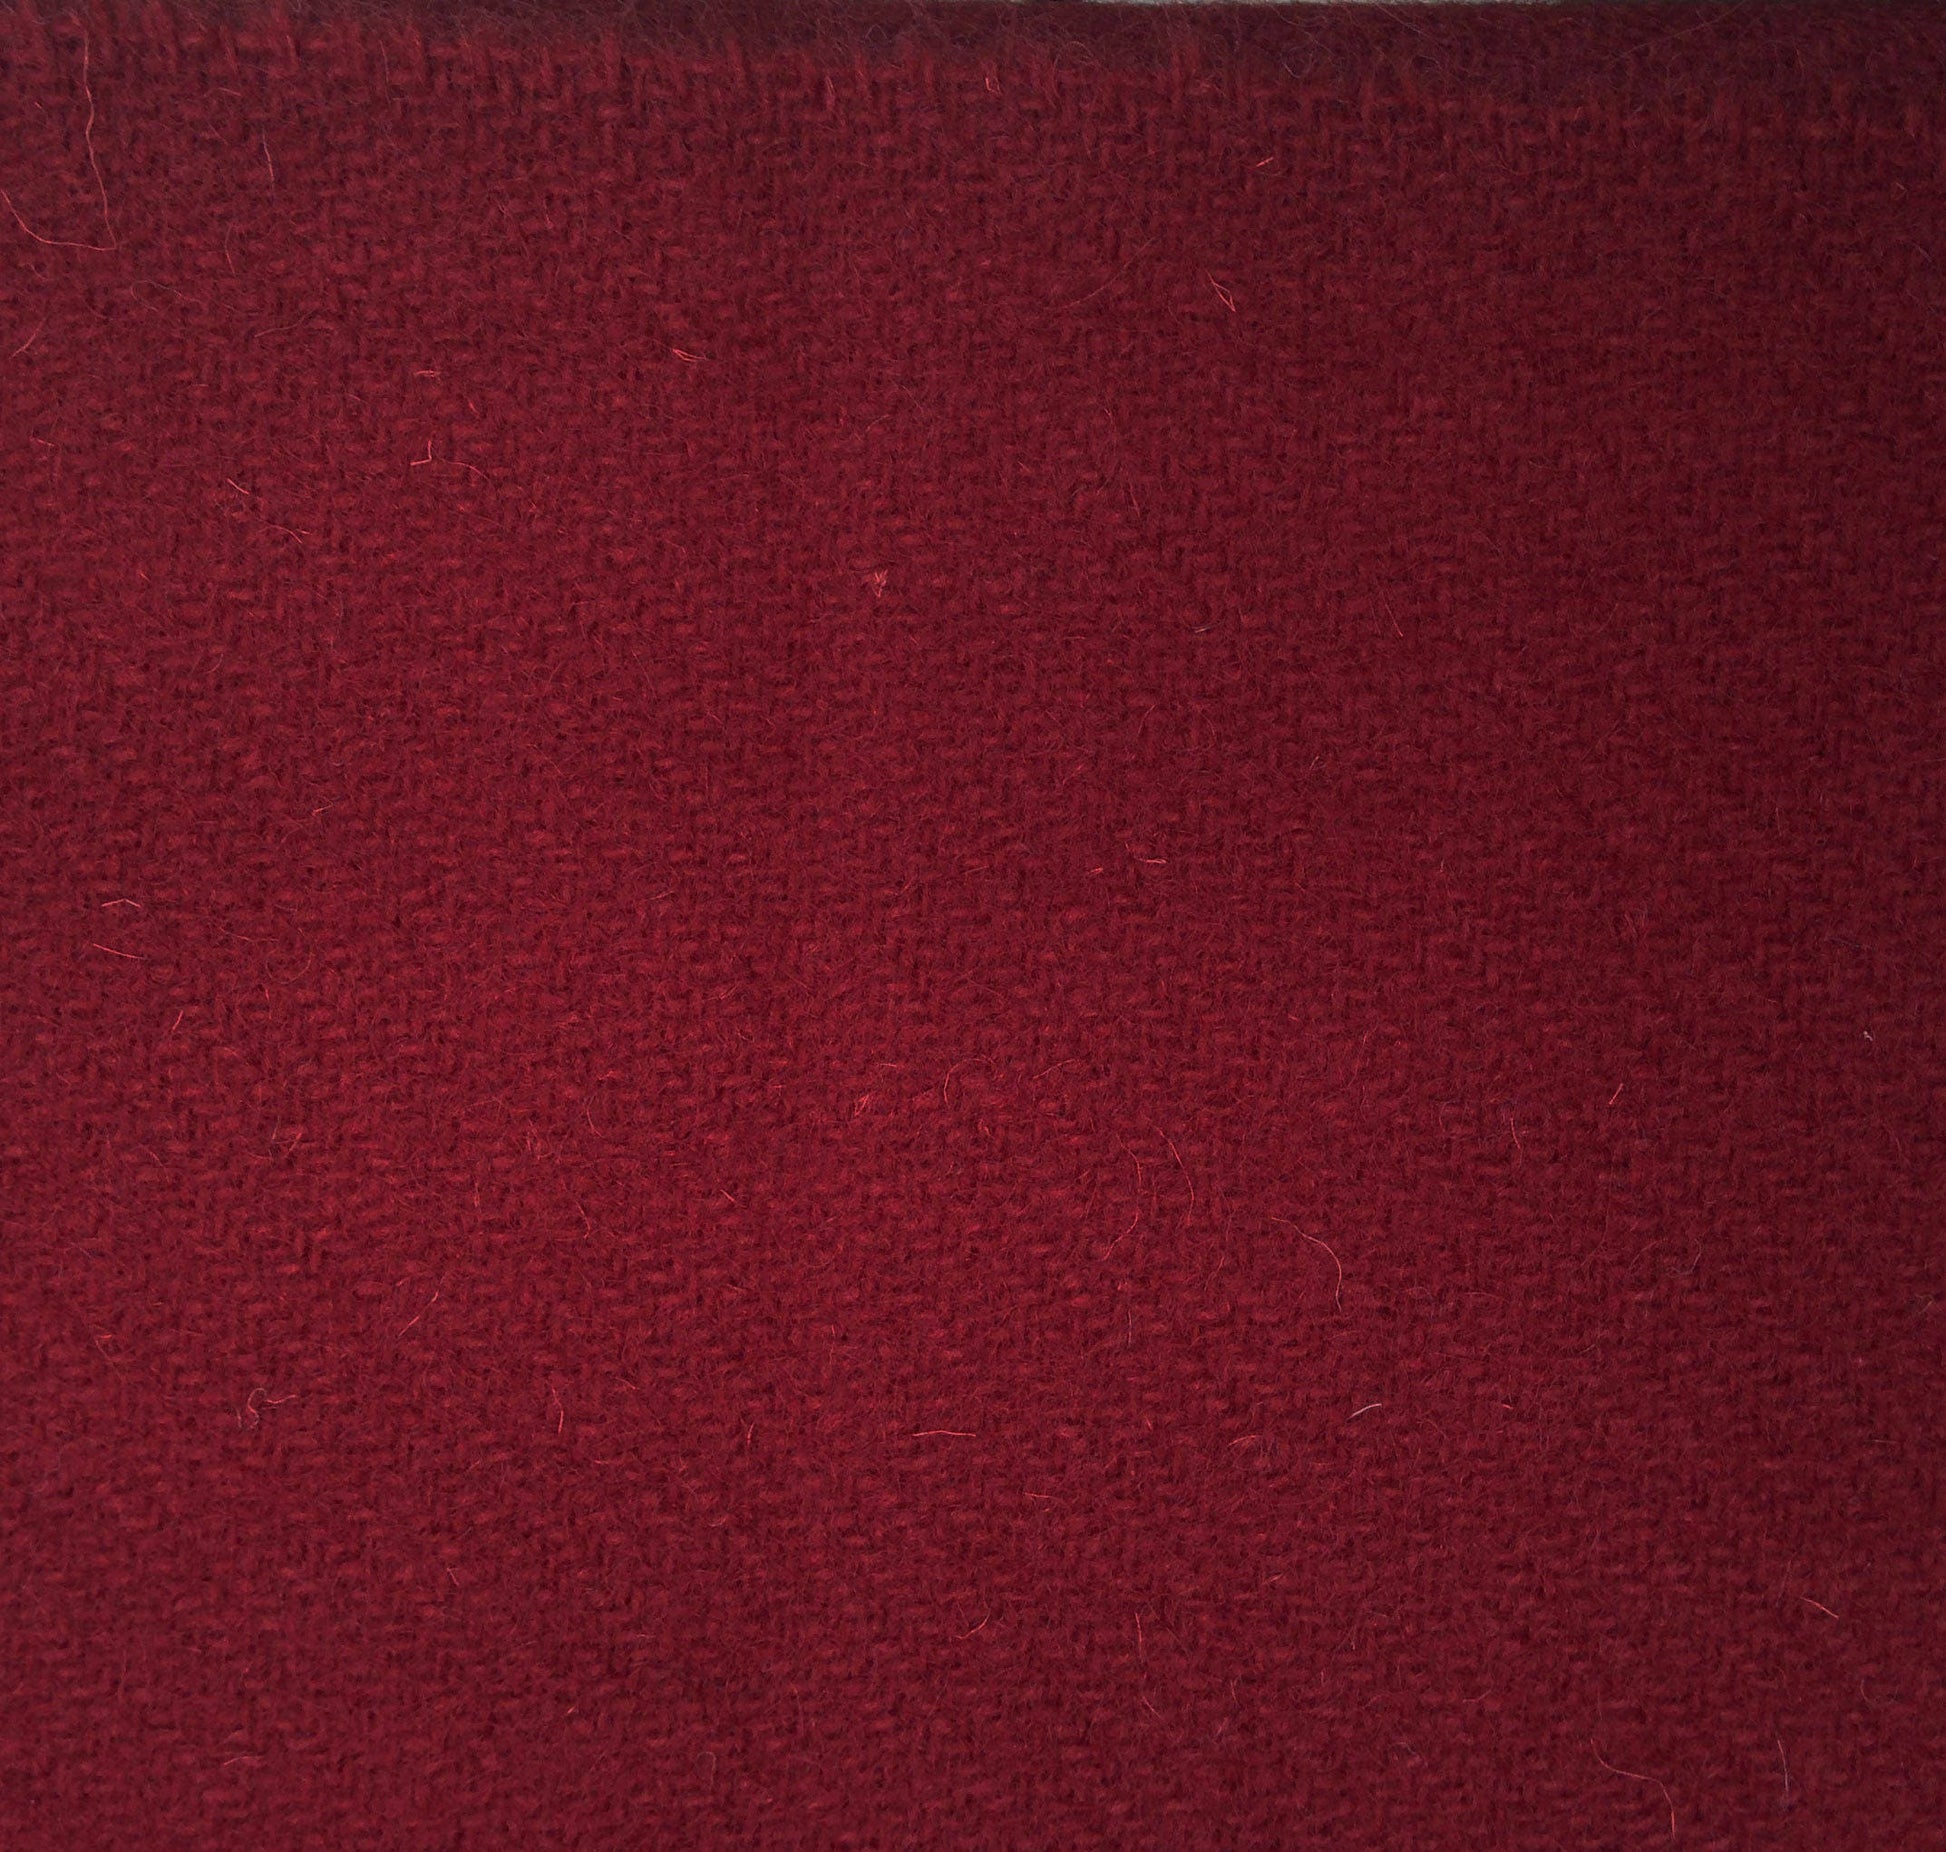 Lincoln Green Tudor Style Woollen 2/2 Twill Cloth Fabric Sold by the Half  Yard -  New Zealand